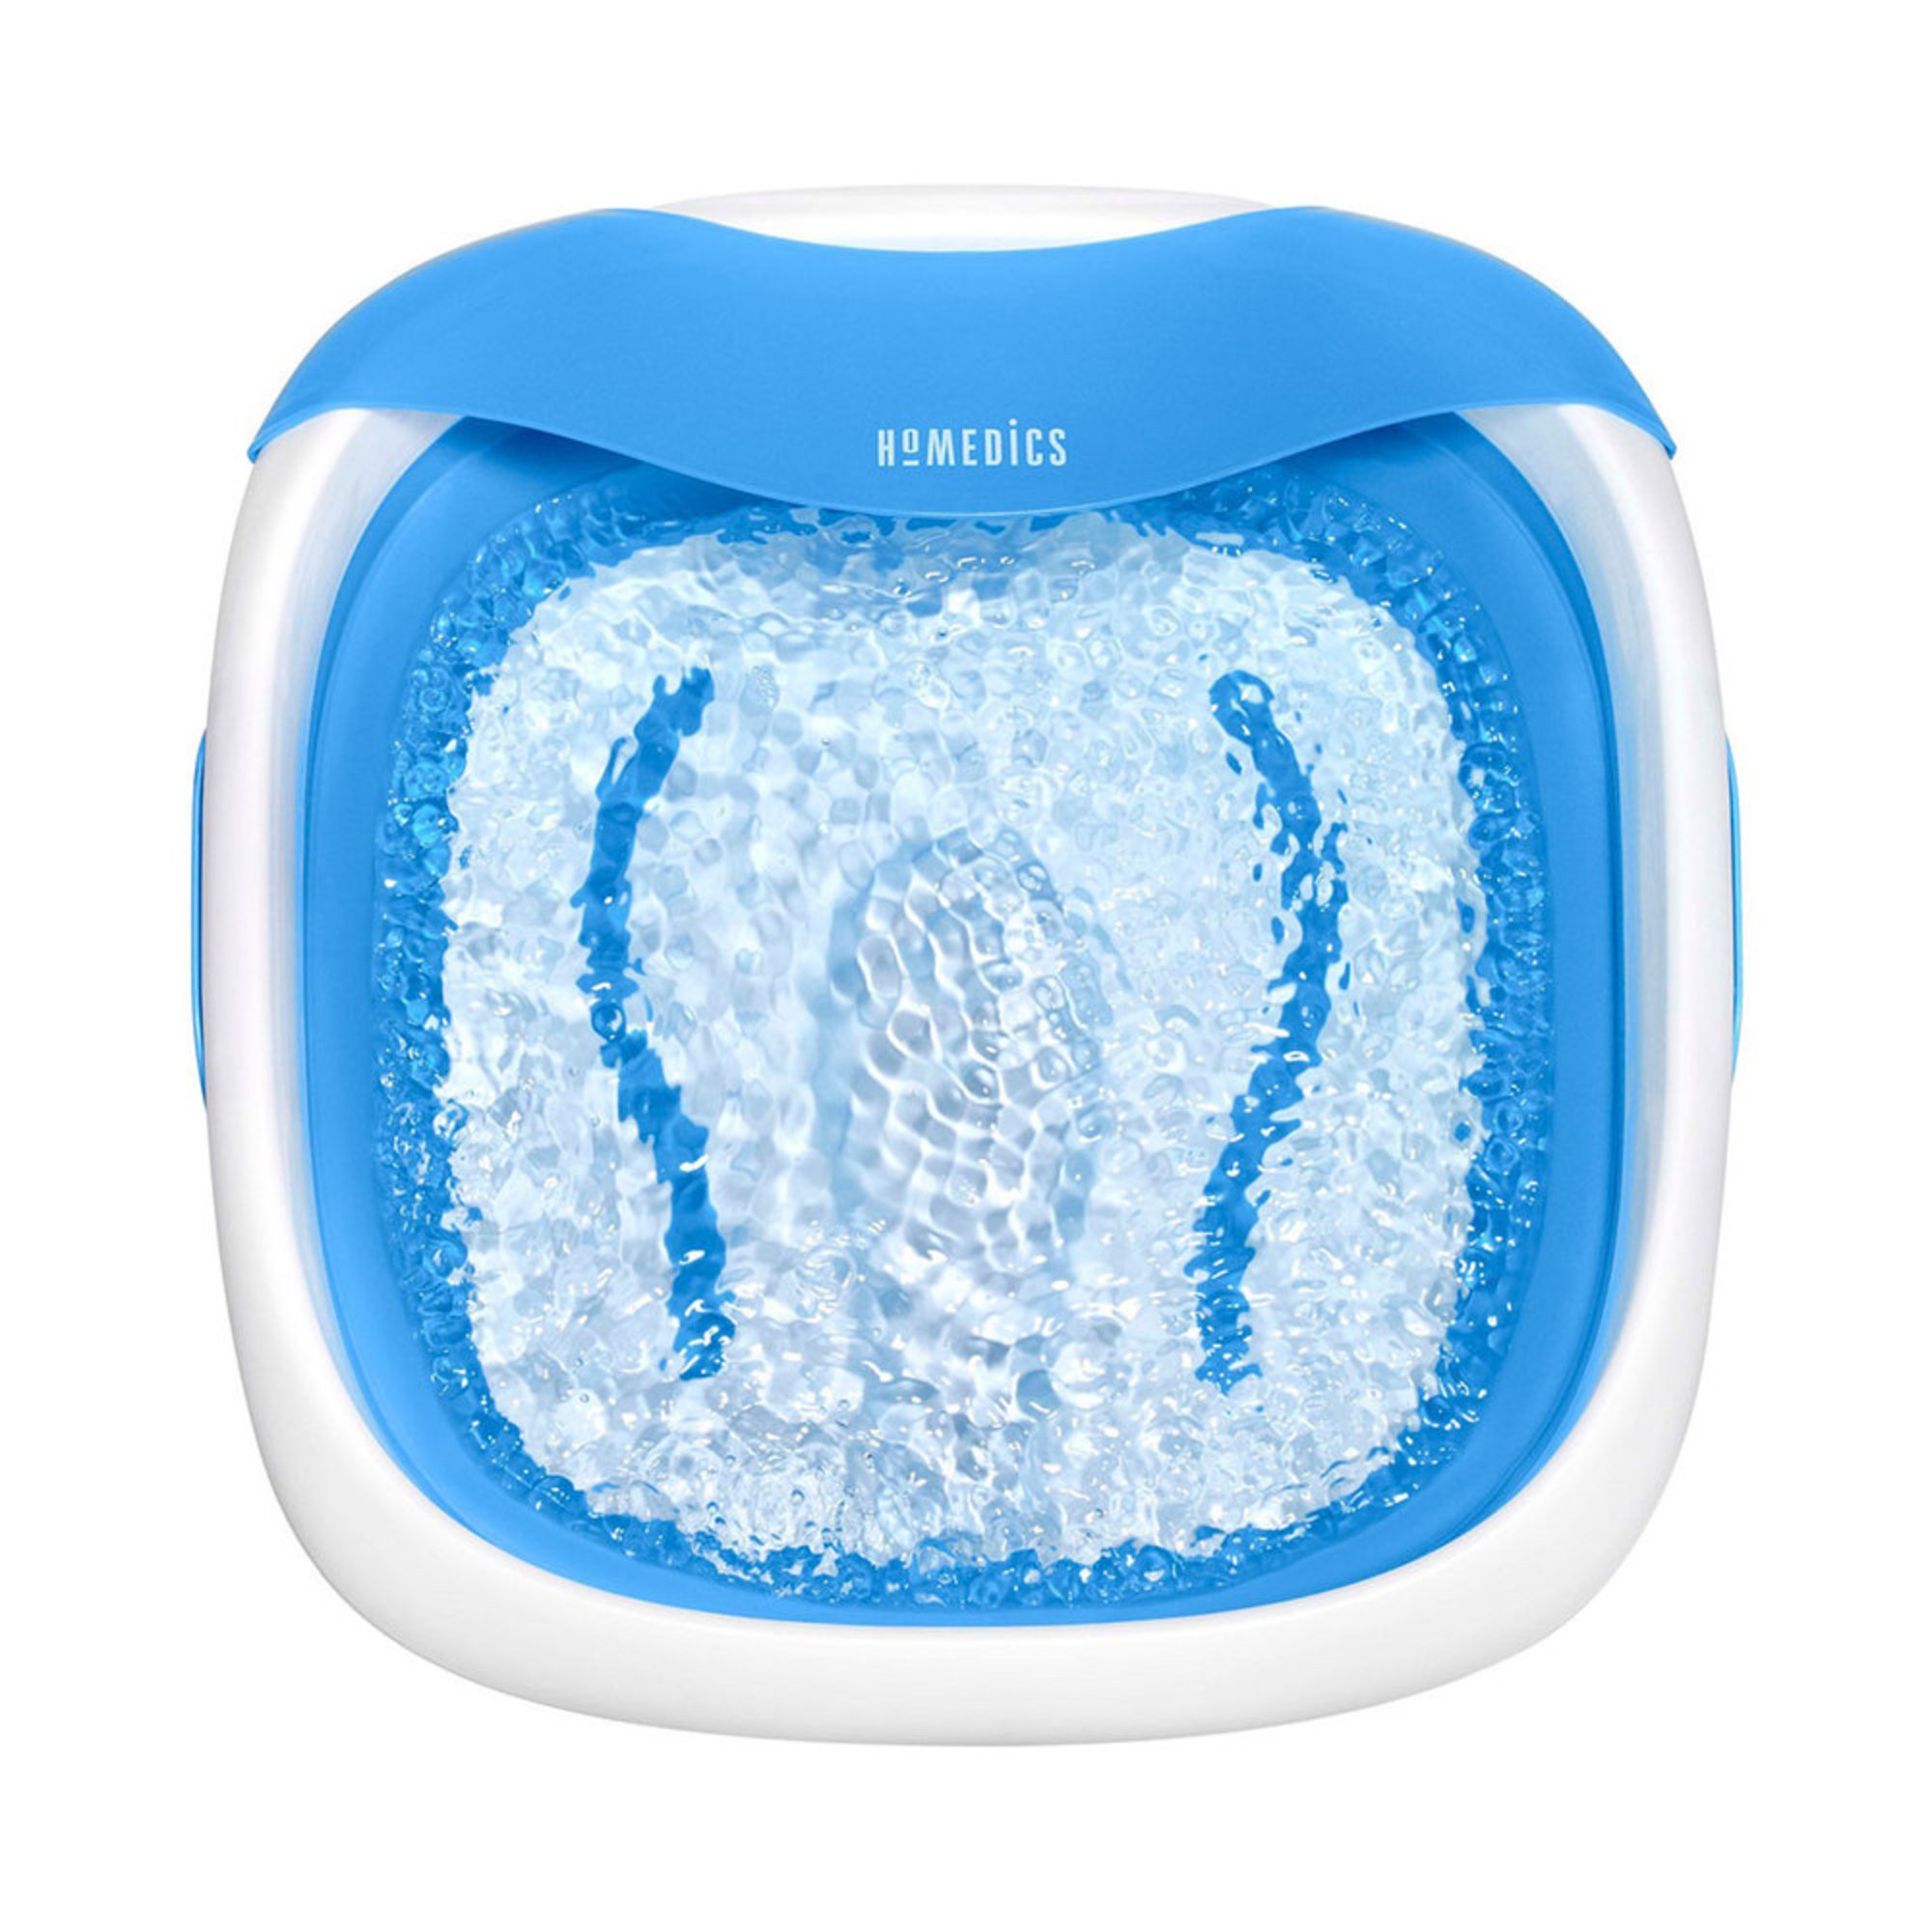 homedics foot spa with heat and massage